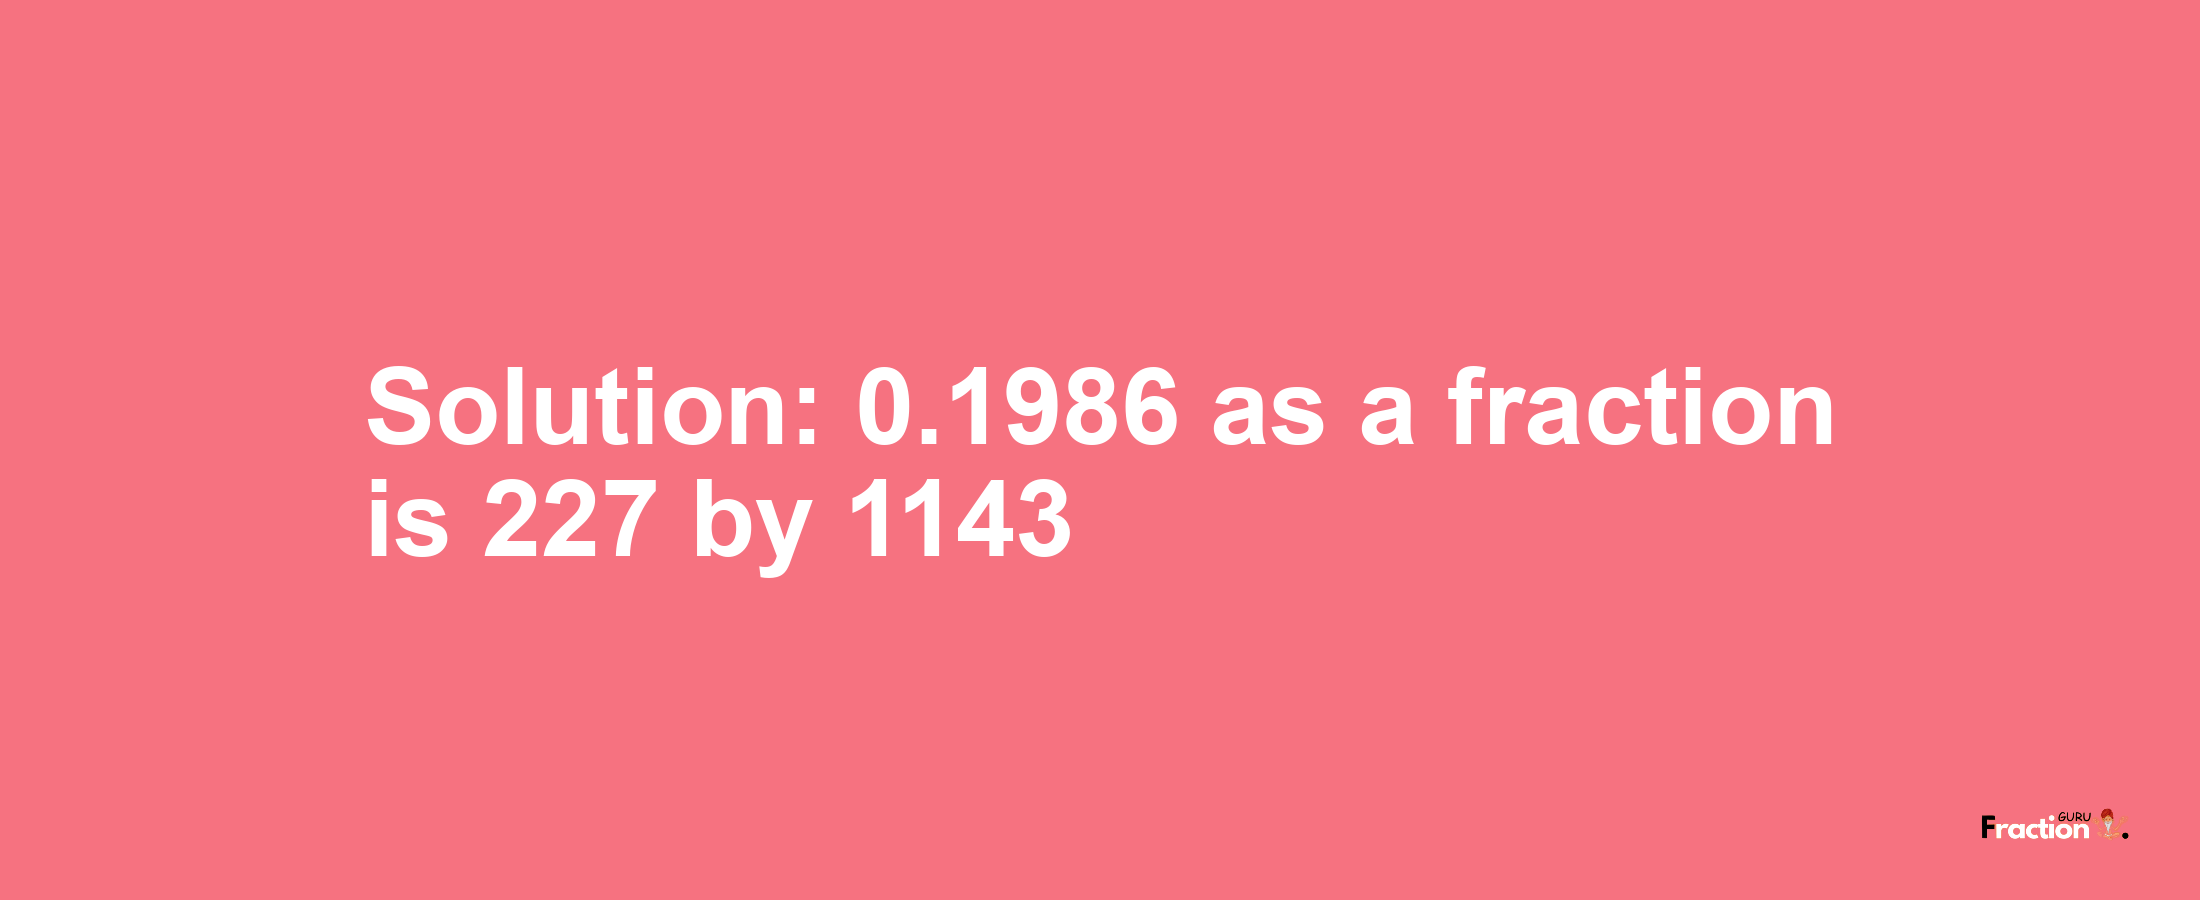 Solution:0.1986 as a fraction is 227/1143